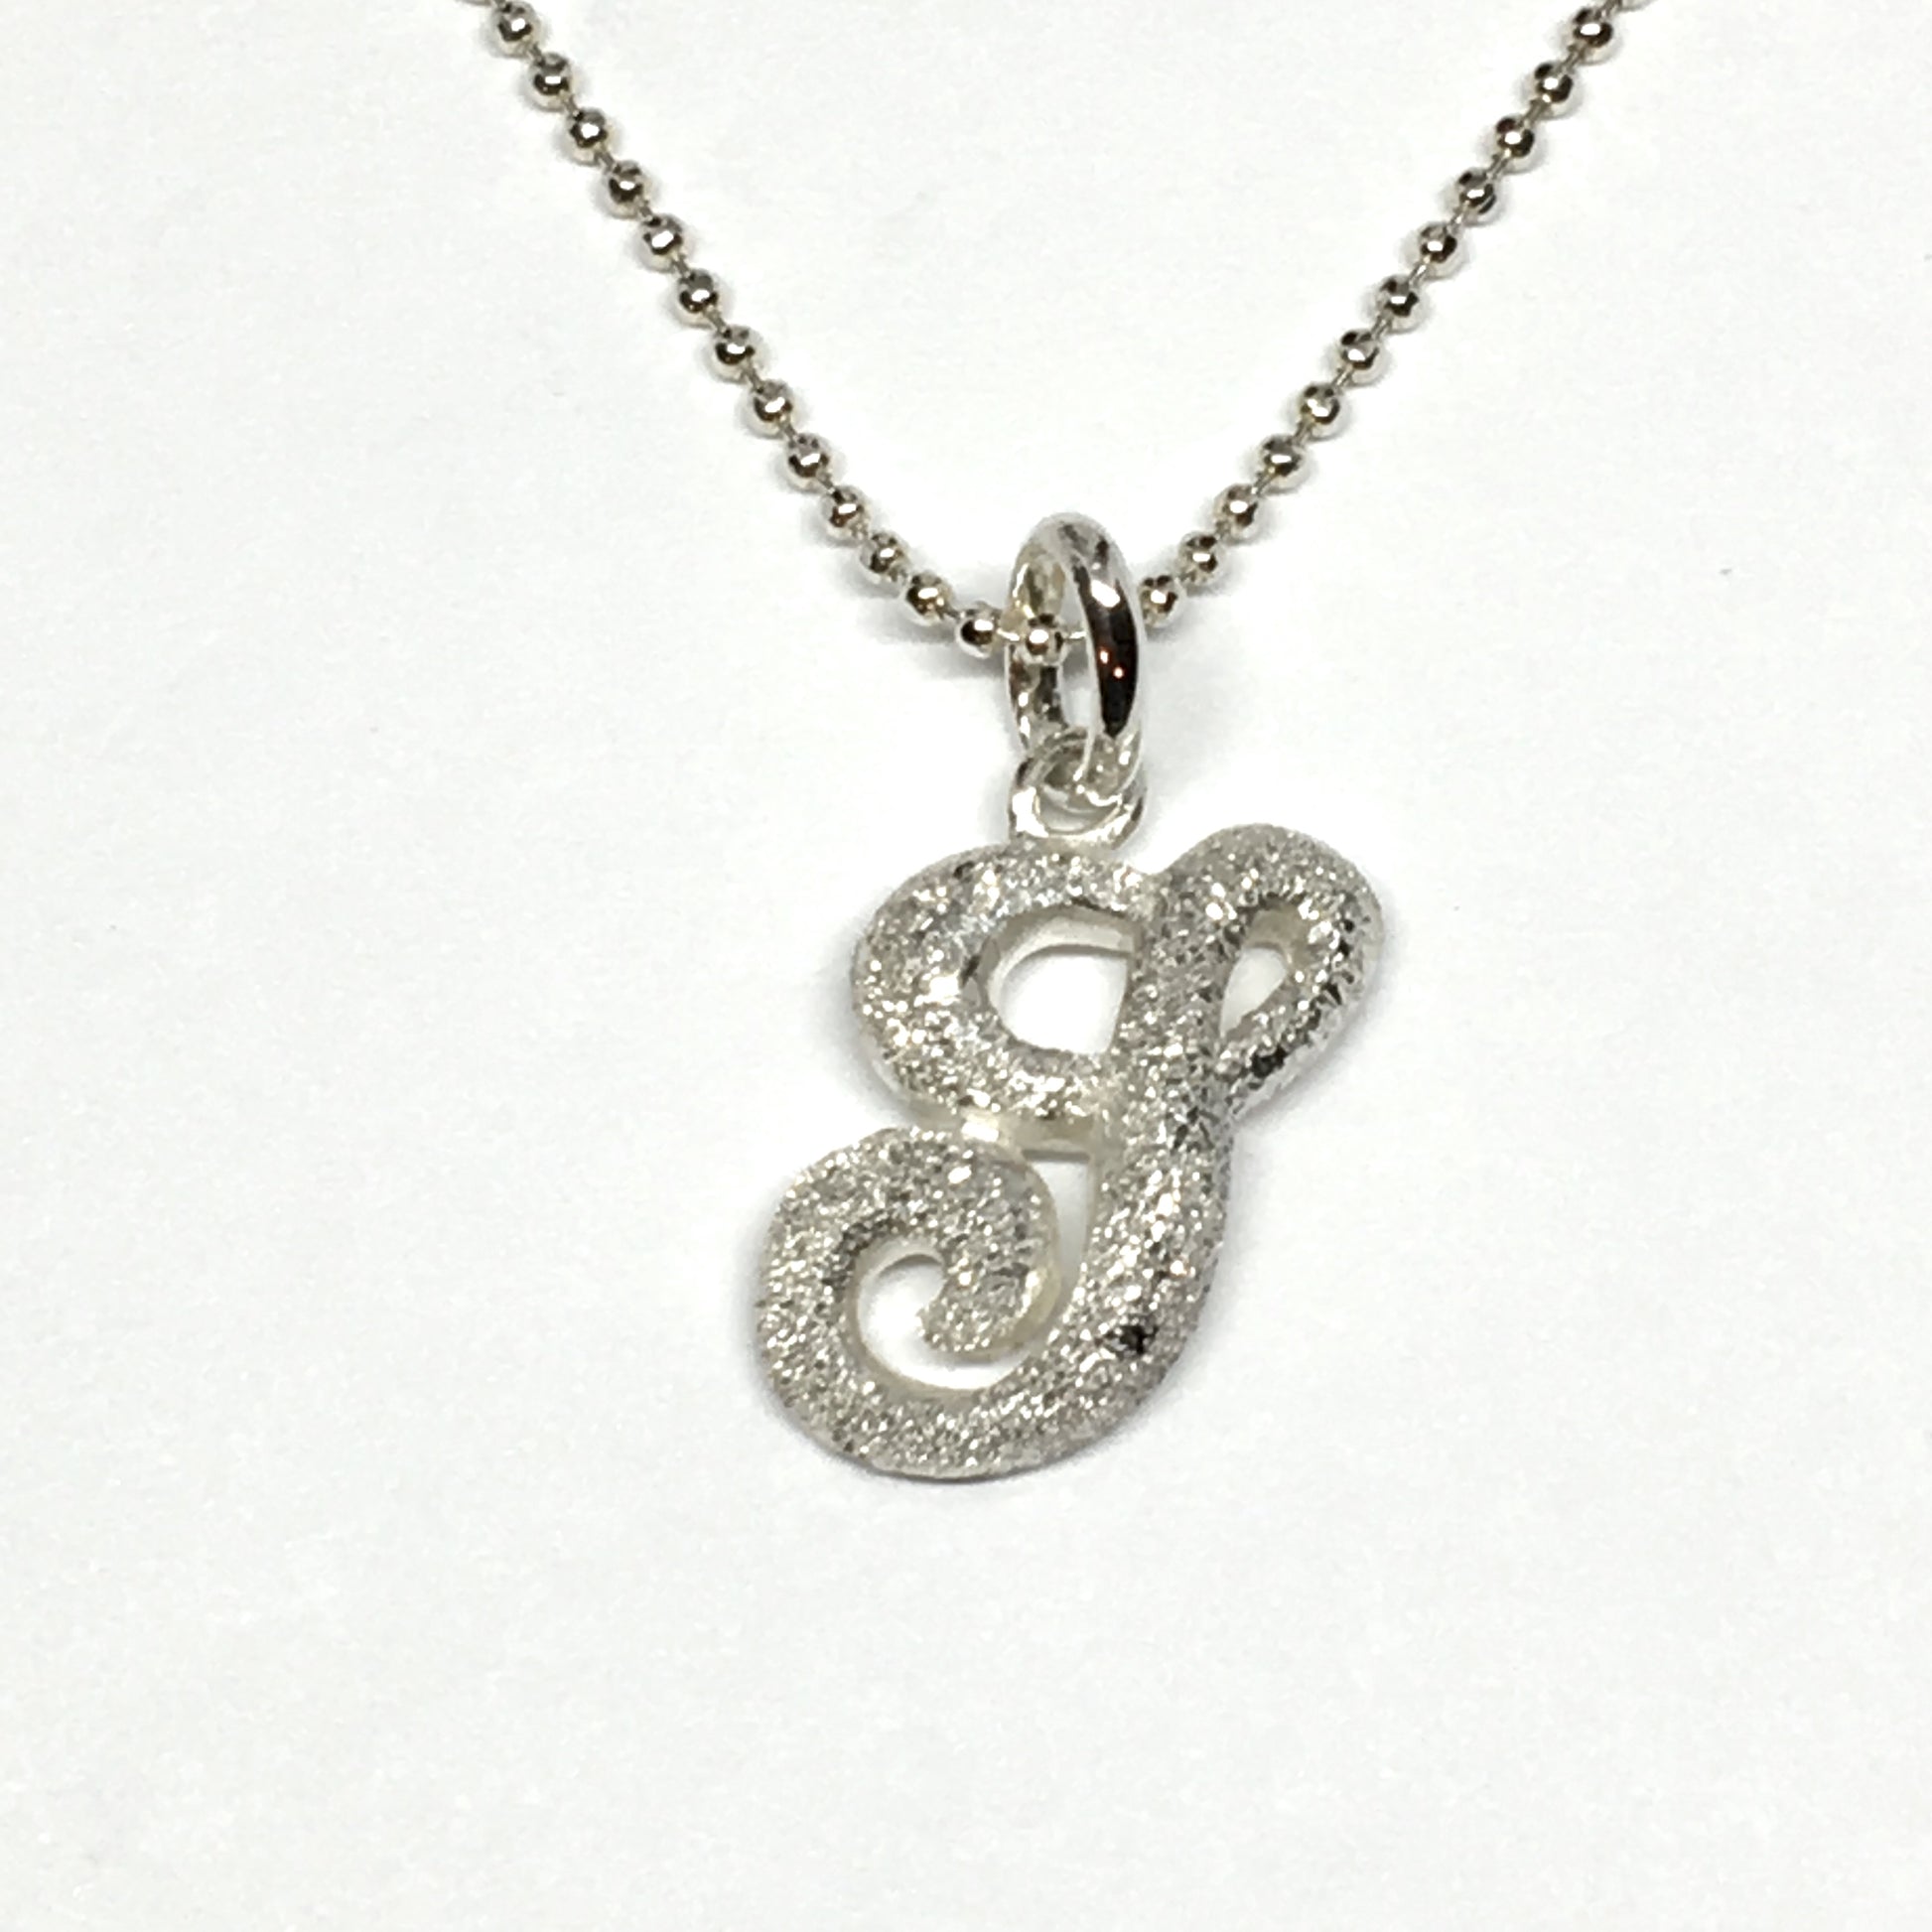 Necklace Womens Sterling Silver 16" Shimmery Design Initial Letter G Pendant Necklace